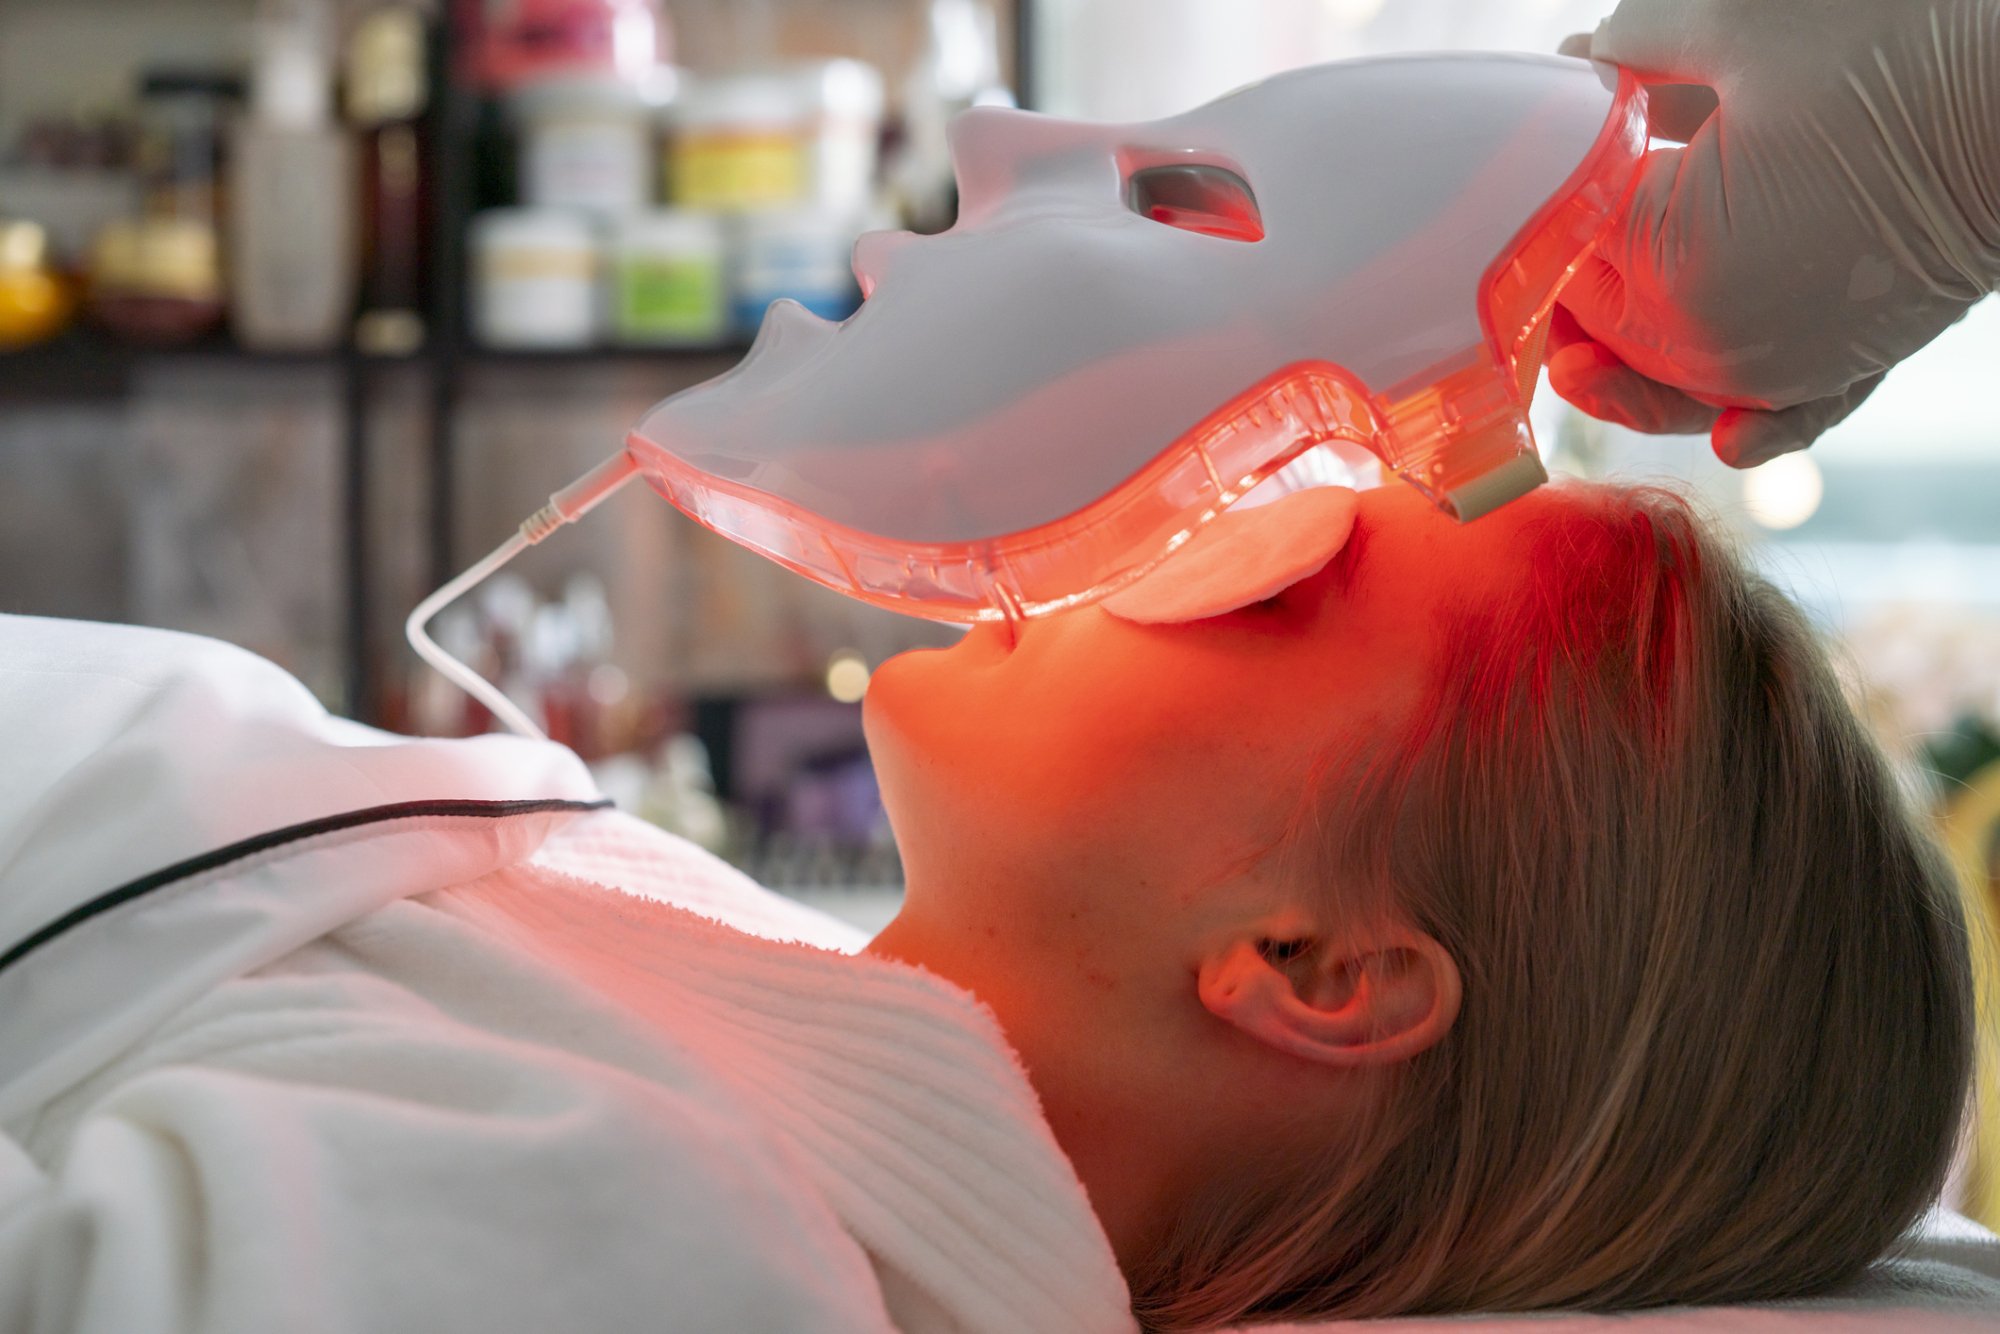 Woman laying down with eye protection on, a white full face mask with red glowing lights is lowered over her face.